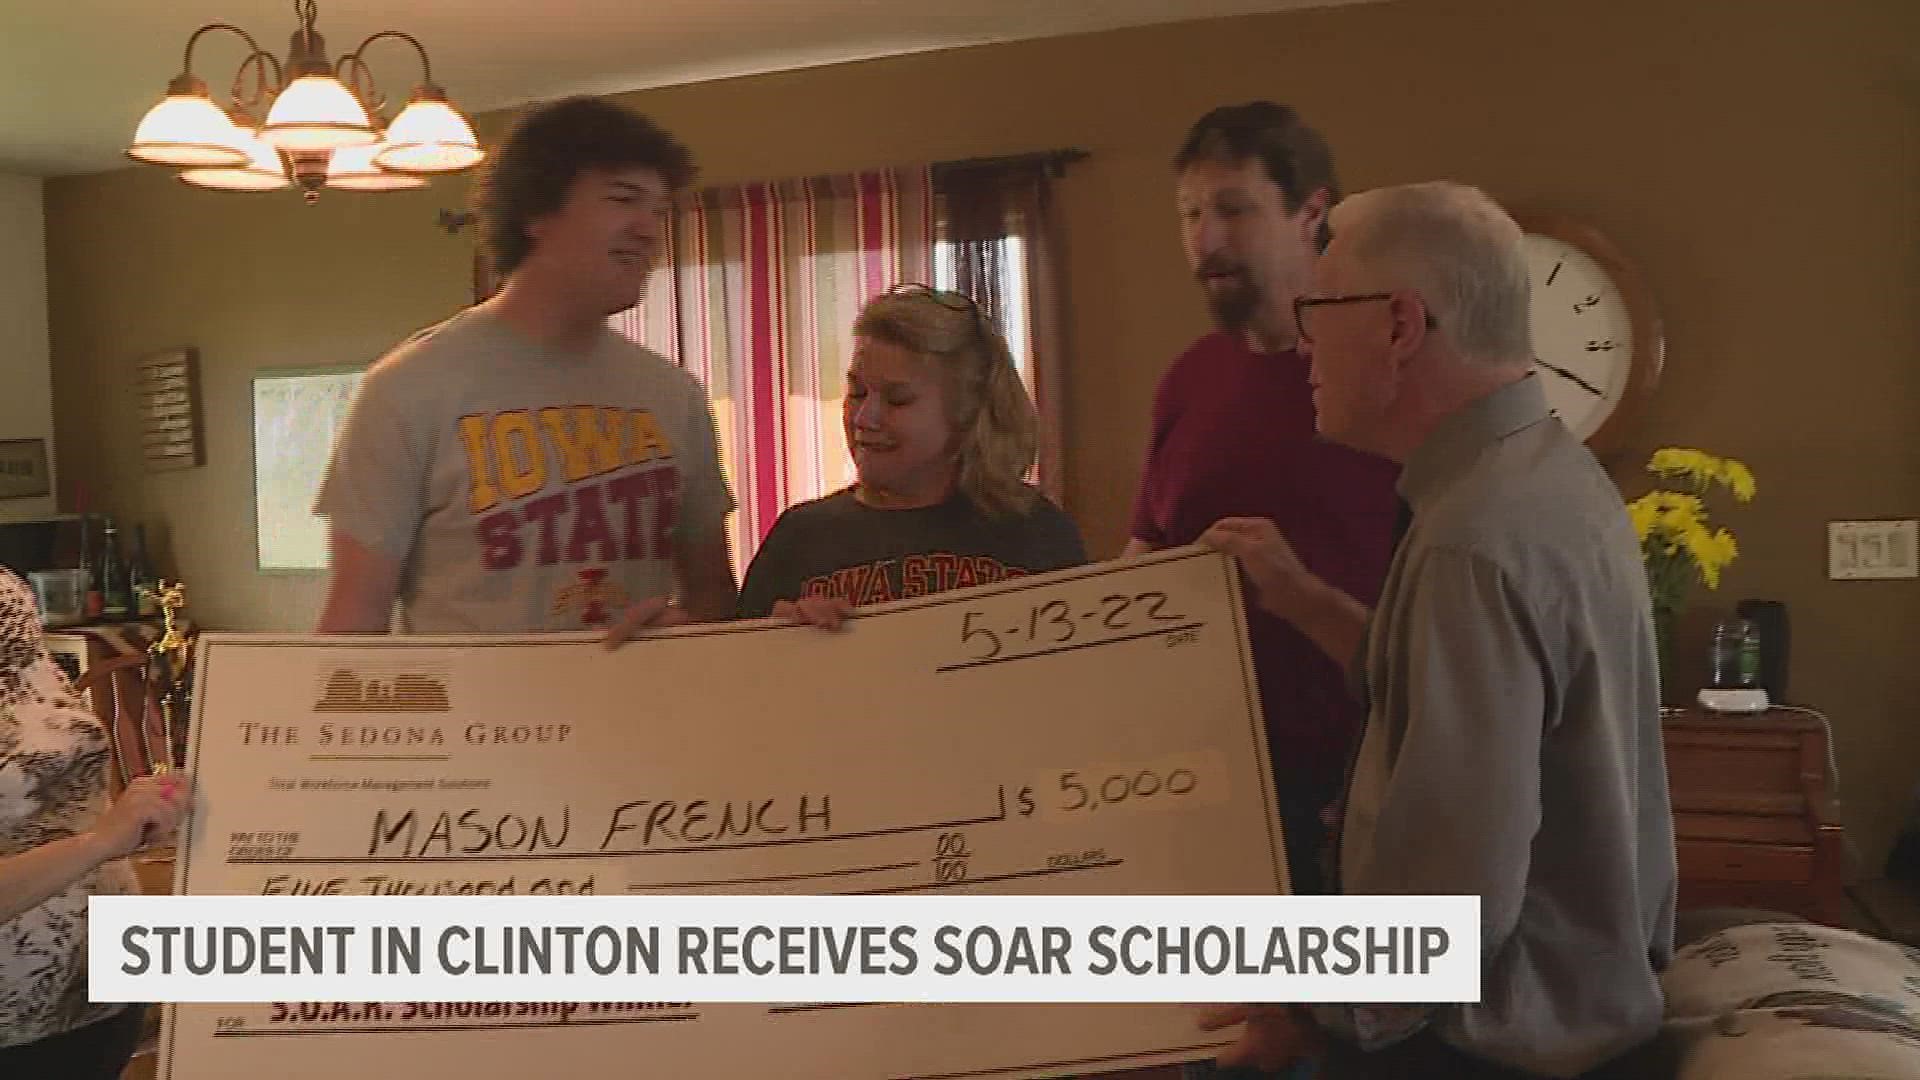 Seventeen-year-old Mason French of Clinton is one of three high school seniors receiving a $5,000 SOAR scholarship from The Sedona Group and WQAD News 8 this year.